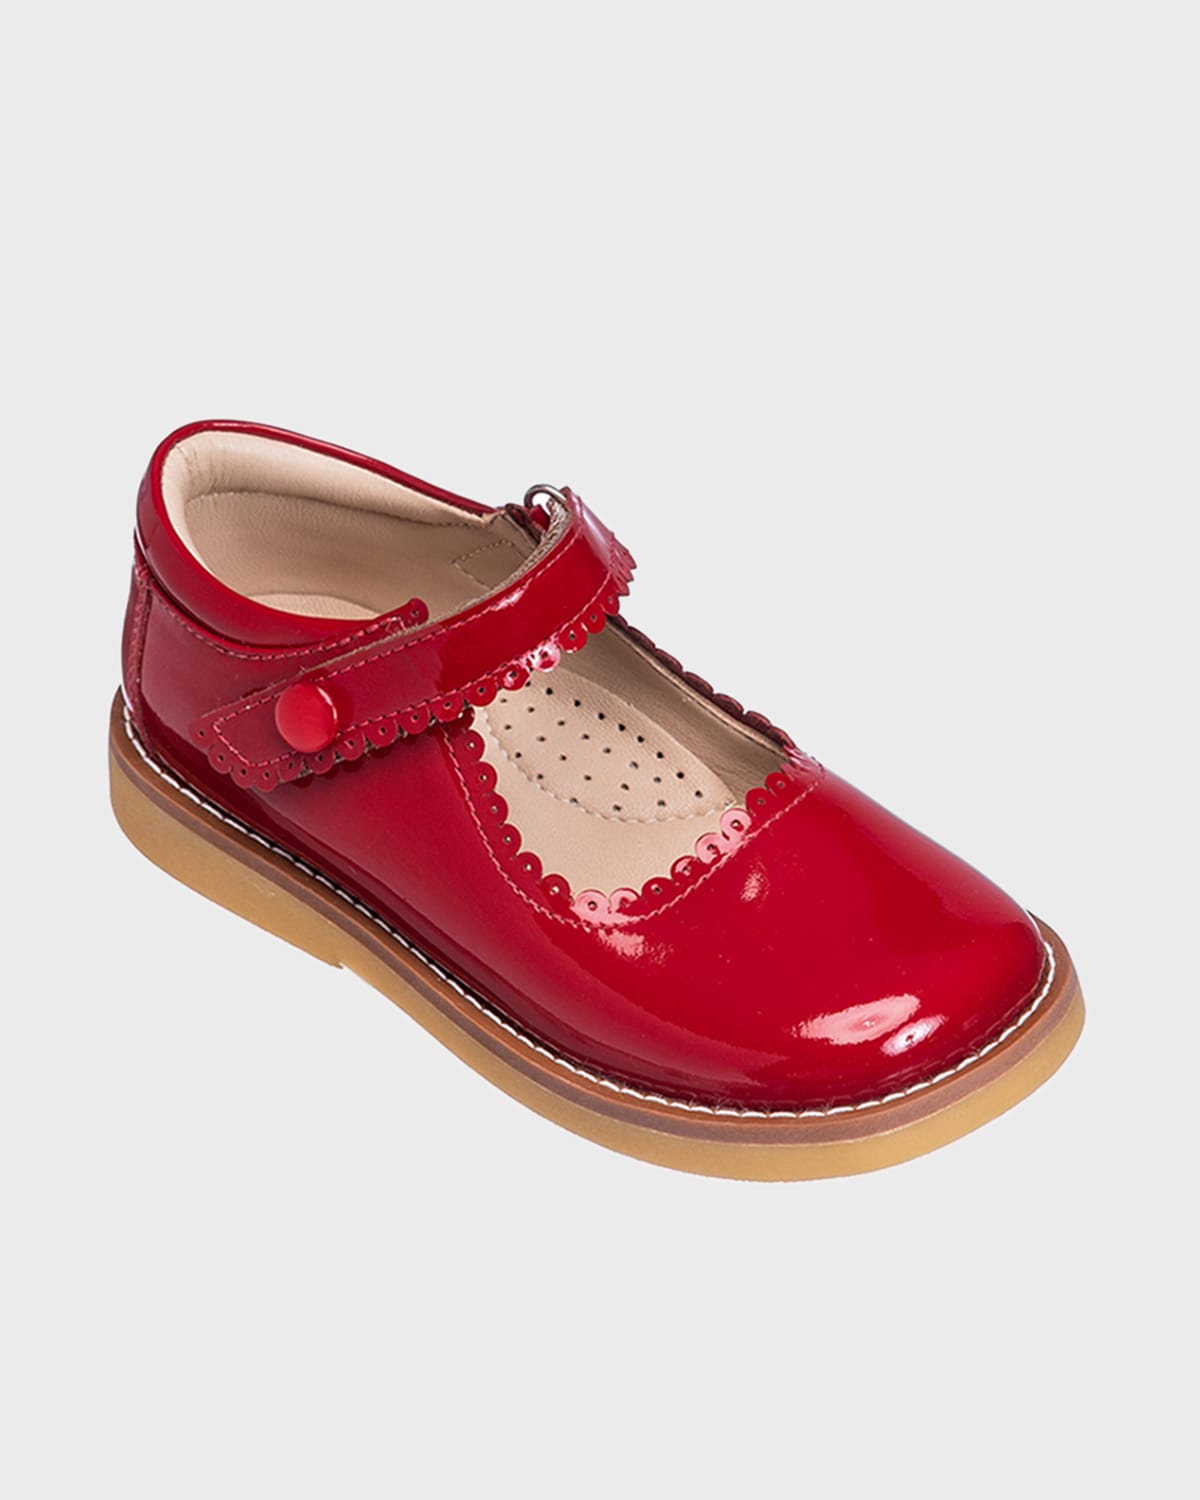 Elephantito Kids' Girl's Scalloped Leather Mary Janes, Toddler In Ptn Red